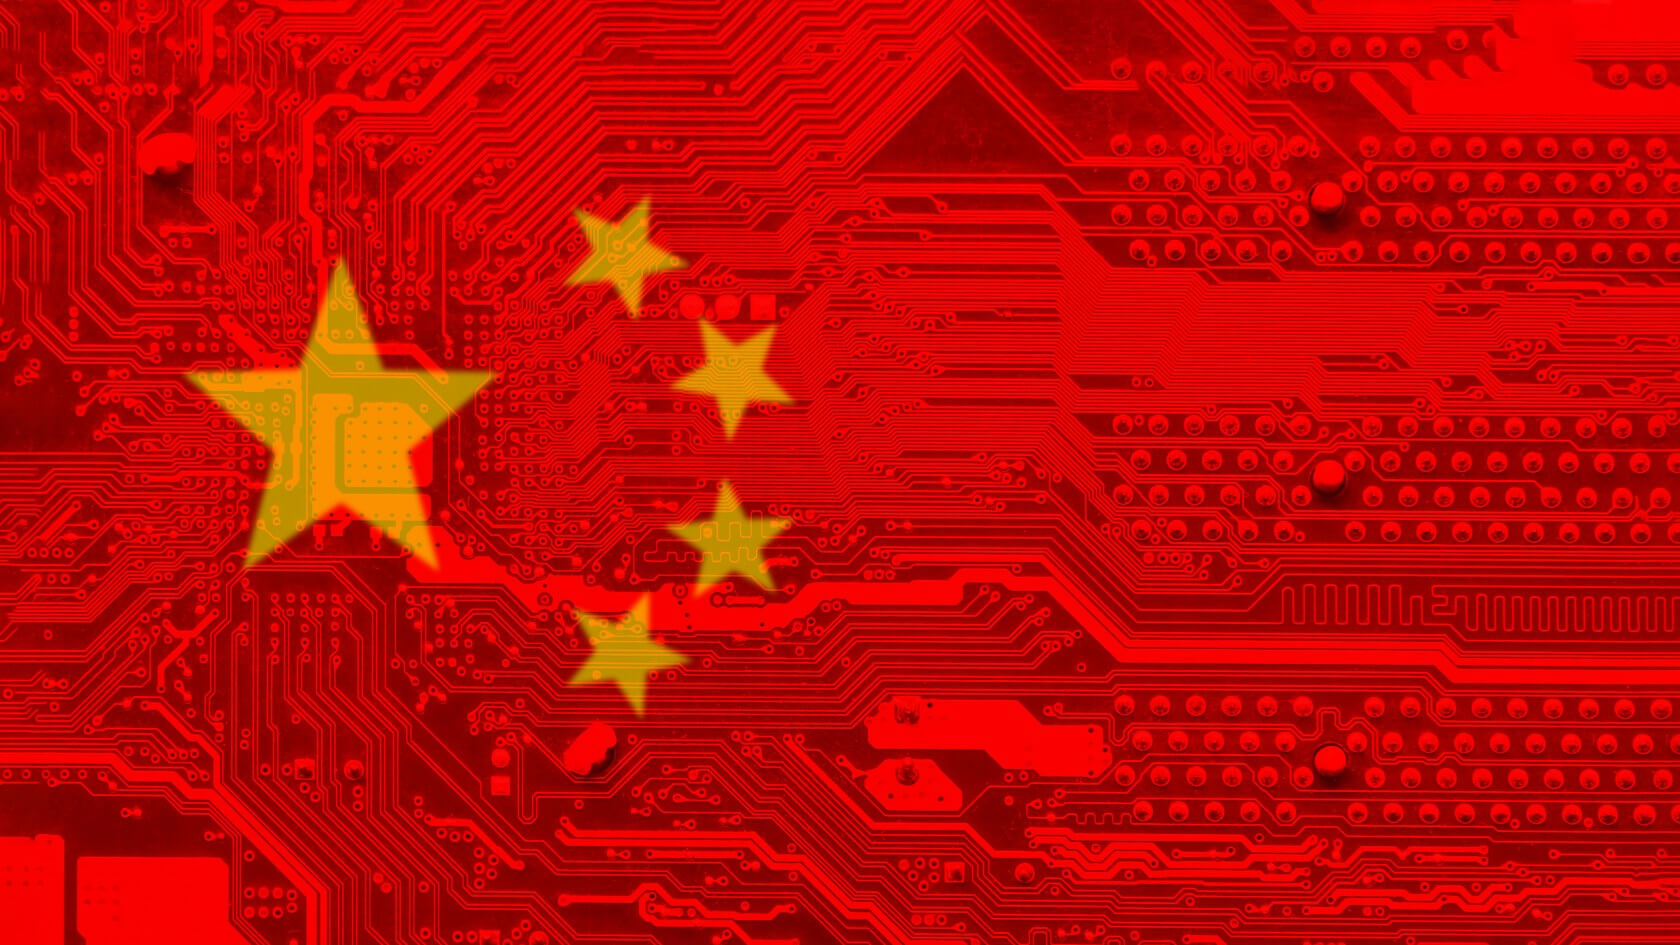 Analysts determine Chinese law lets police hack online services and copy user data for 'security'